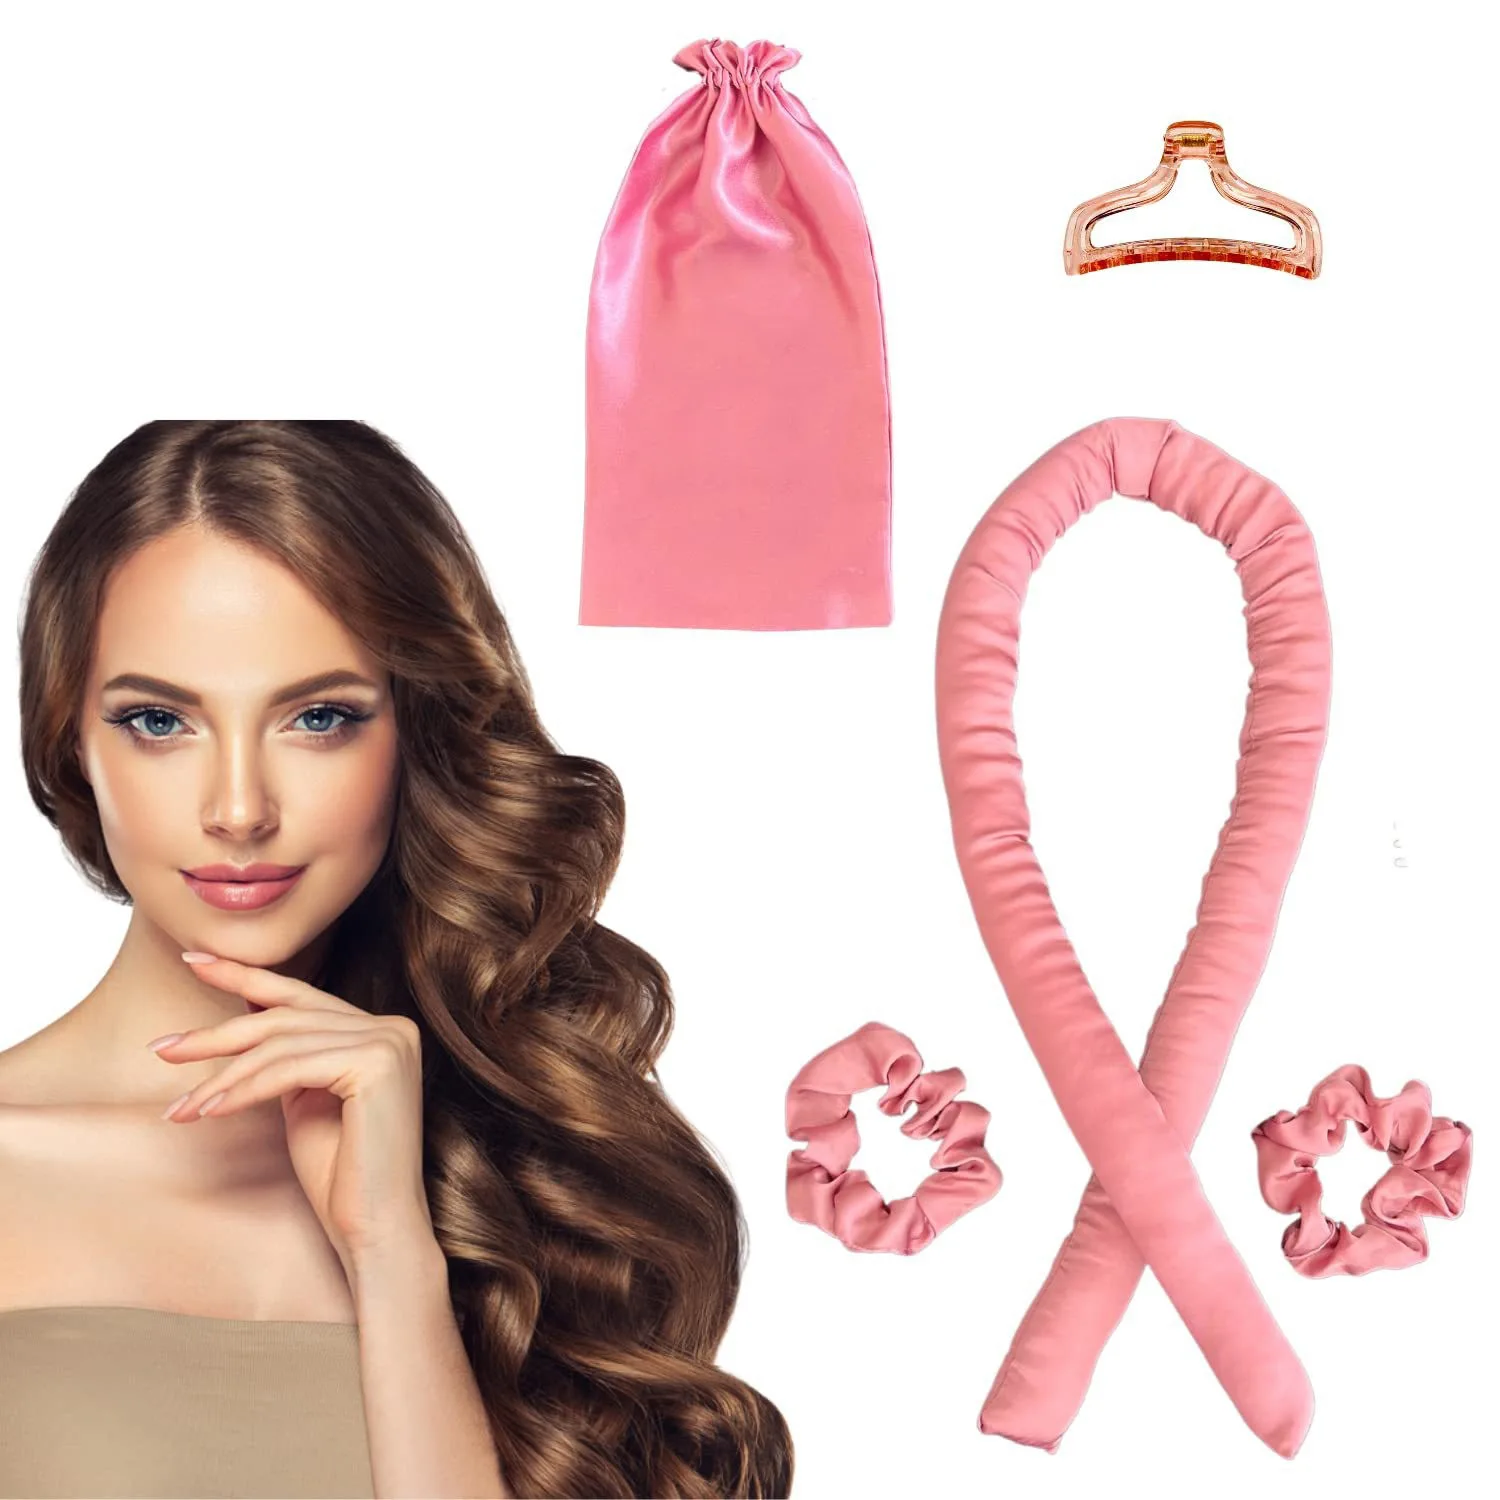 

Top Seller No Heating Curly Hair 5pieces Set Soft Cotton filling Inside Hair Roller Rod Headband Clips Ties Fashion Accessories